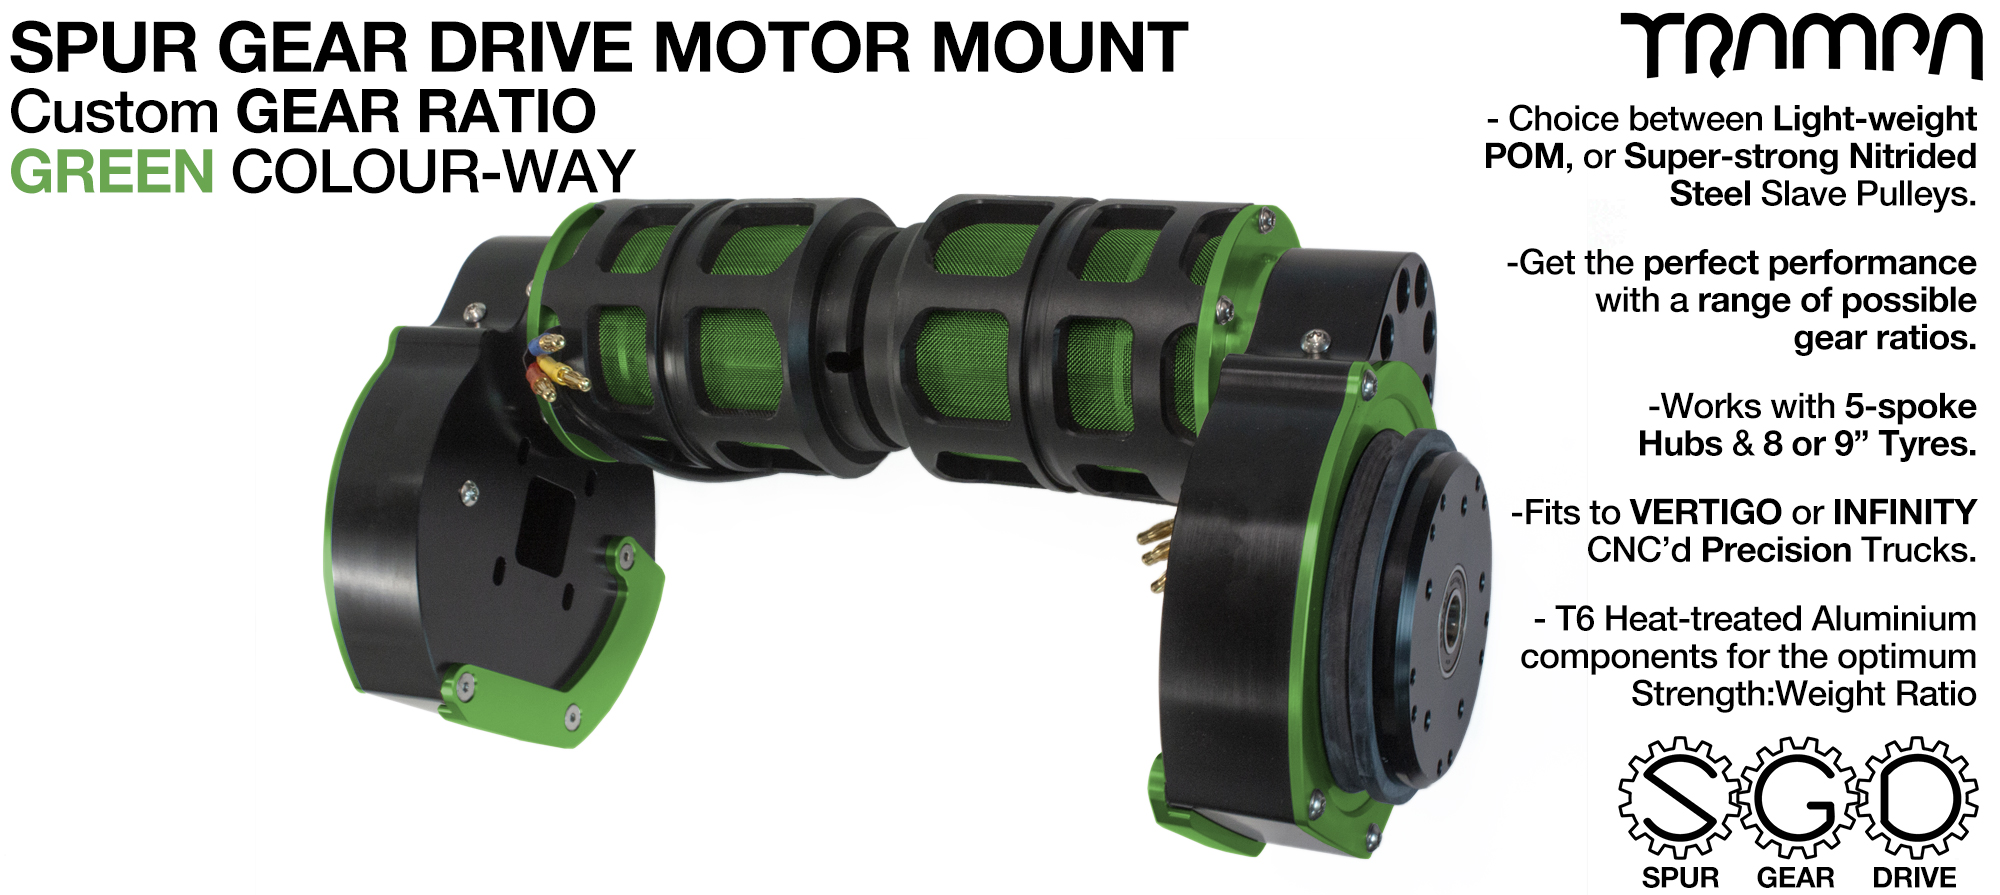 Mountainboard Spur Gear Drive TWIN Motor Mount with PULLEYS & FILTERS - GREEN